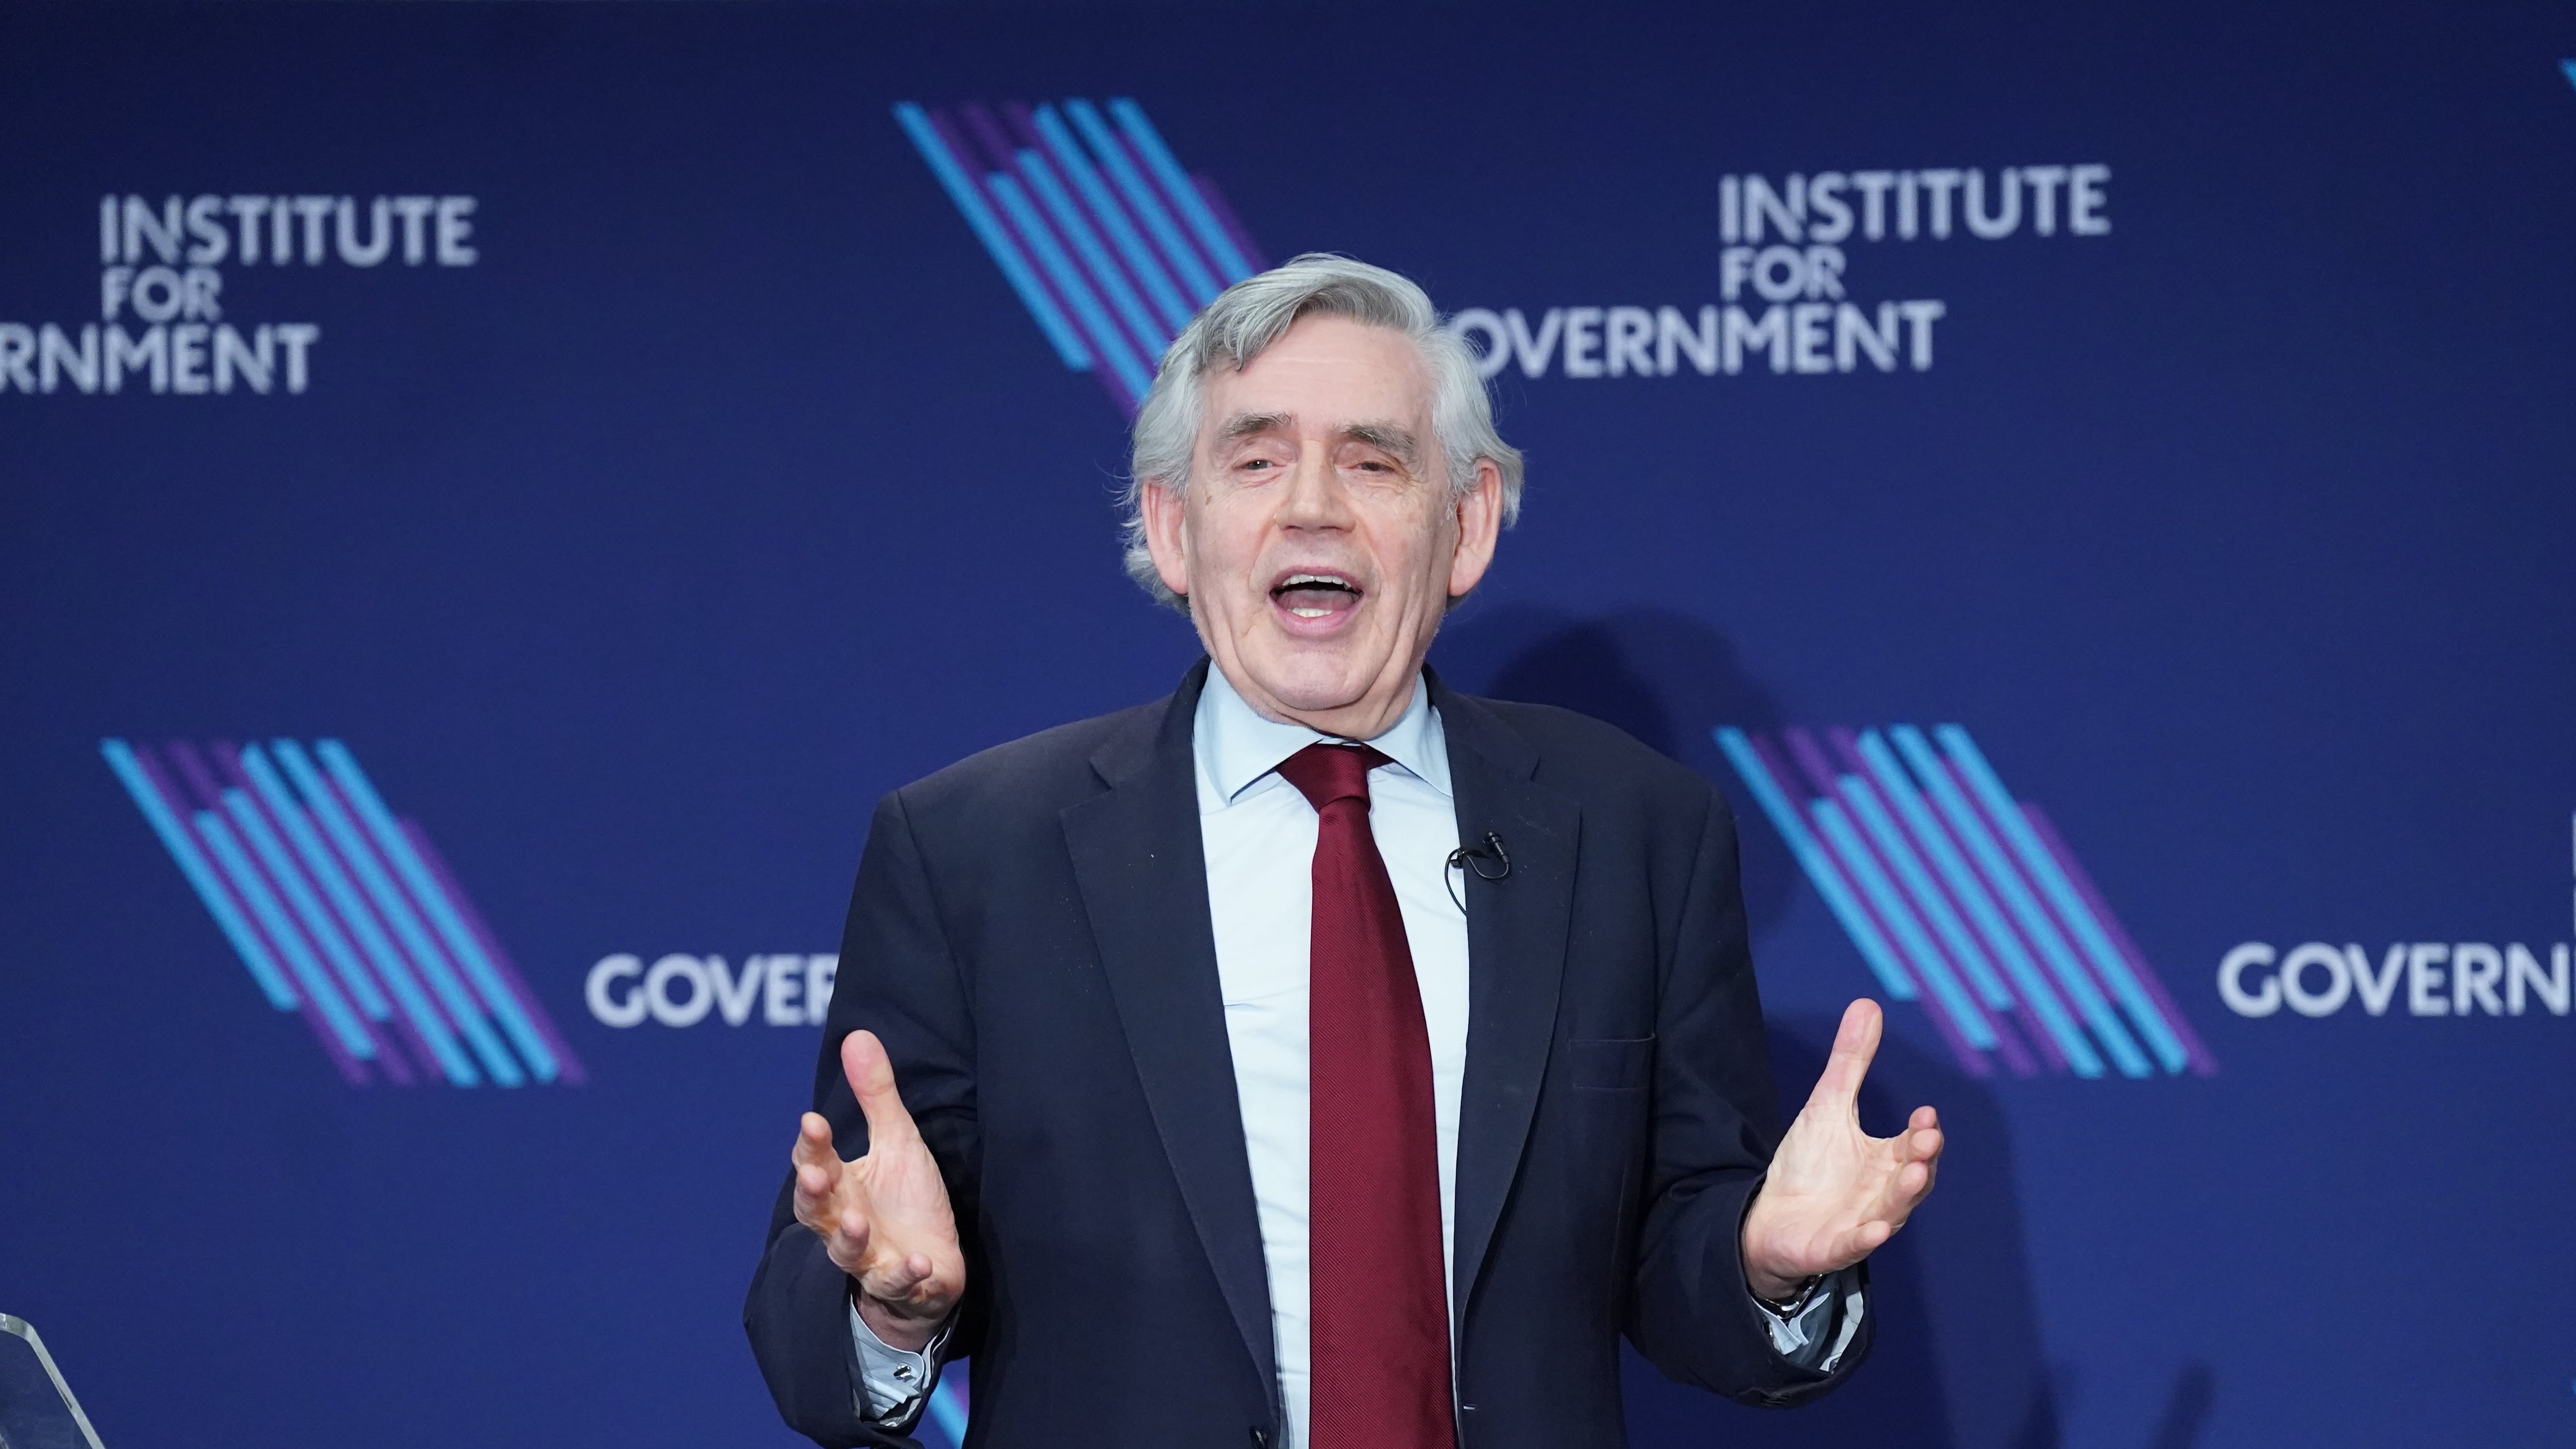 Former prime minister Gordon Brown hit out at the SNP